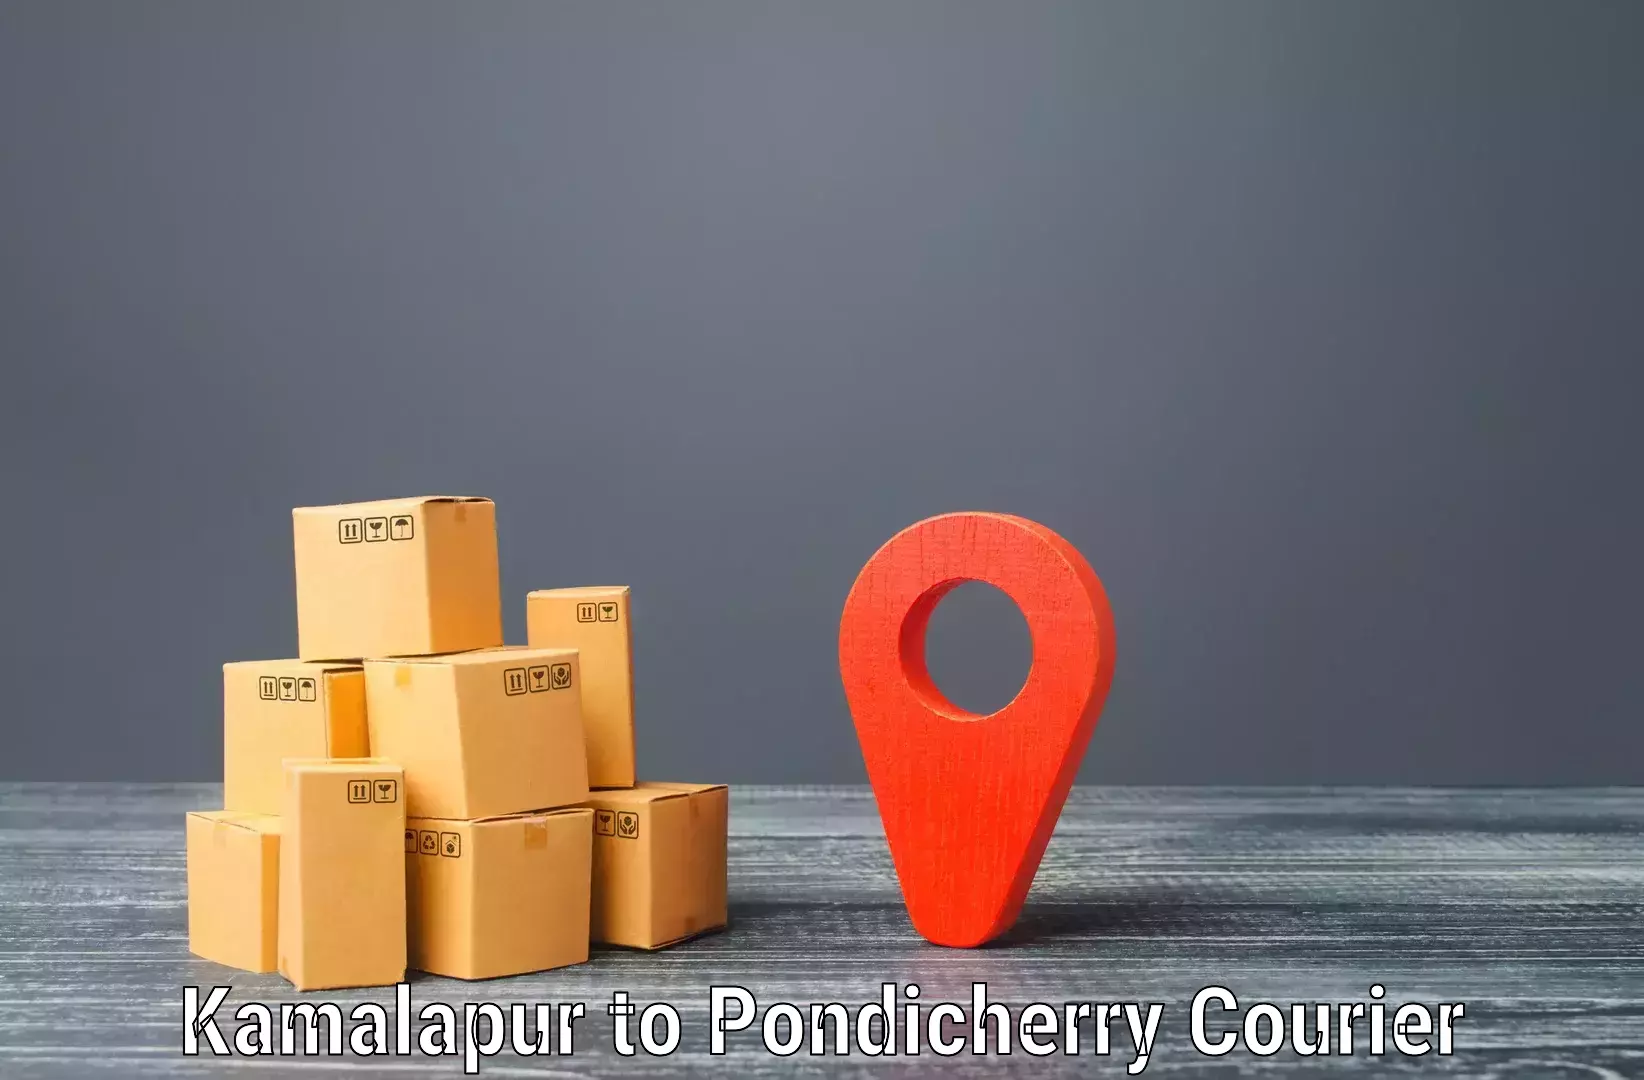 Efficient parcel tracking in Kamalapur to Metttupalayam